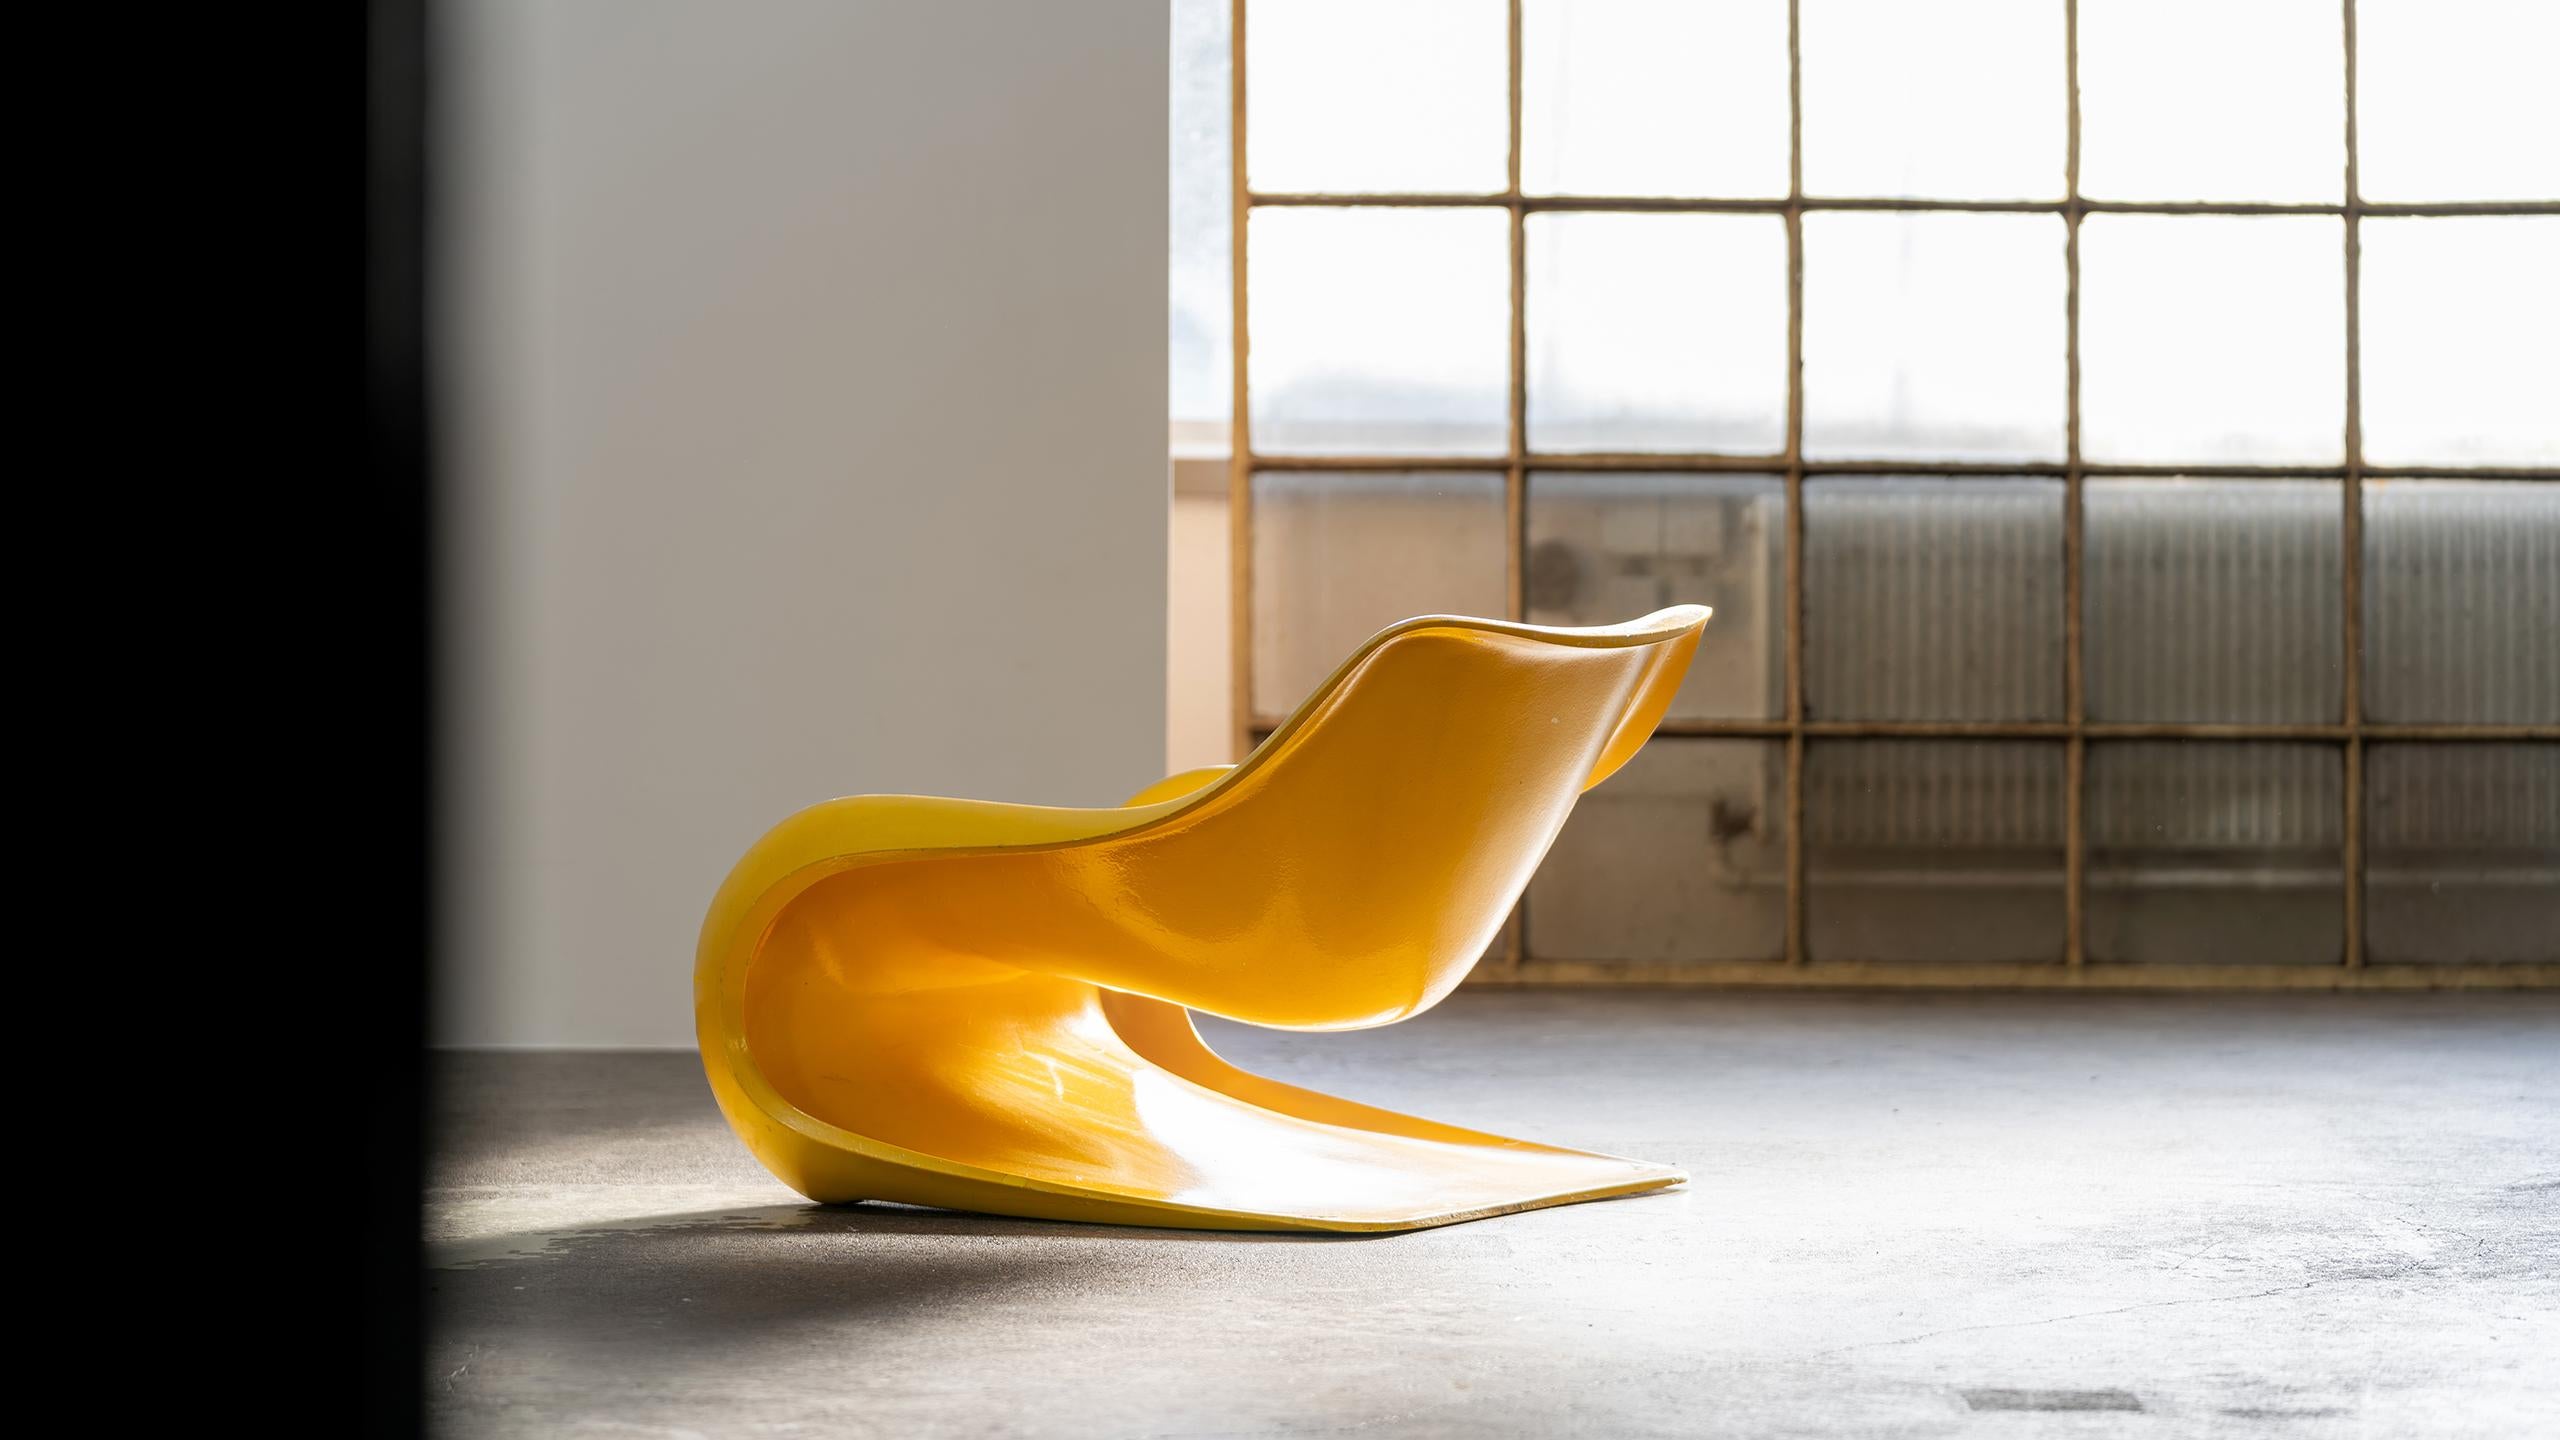 Hand-Crafted Targa Chair by Klaus Uredat, 19709 for Horn Collection, Germany - Organic Design